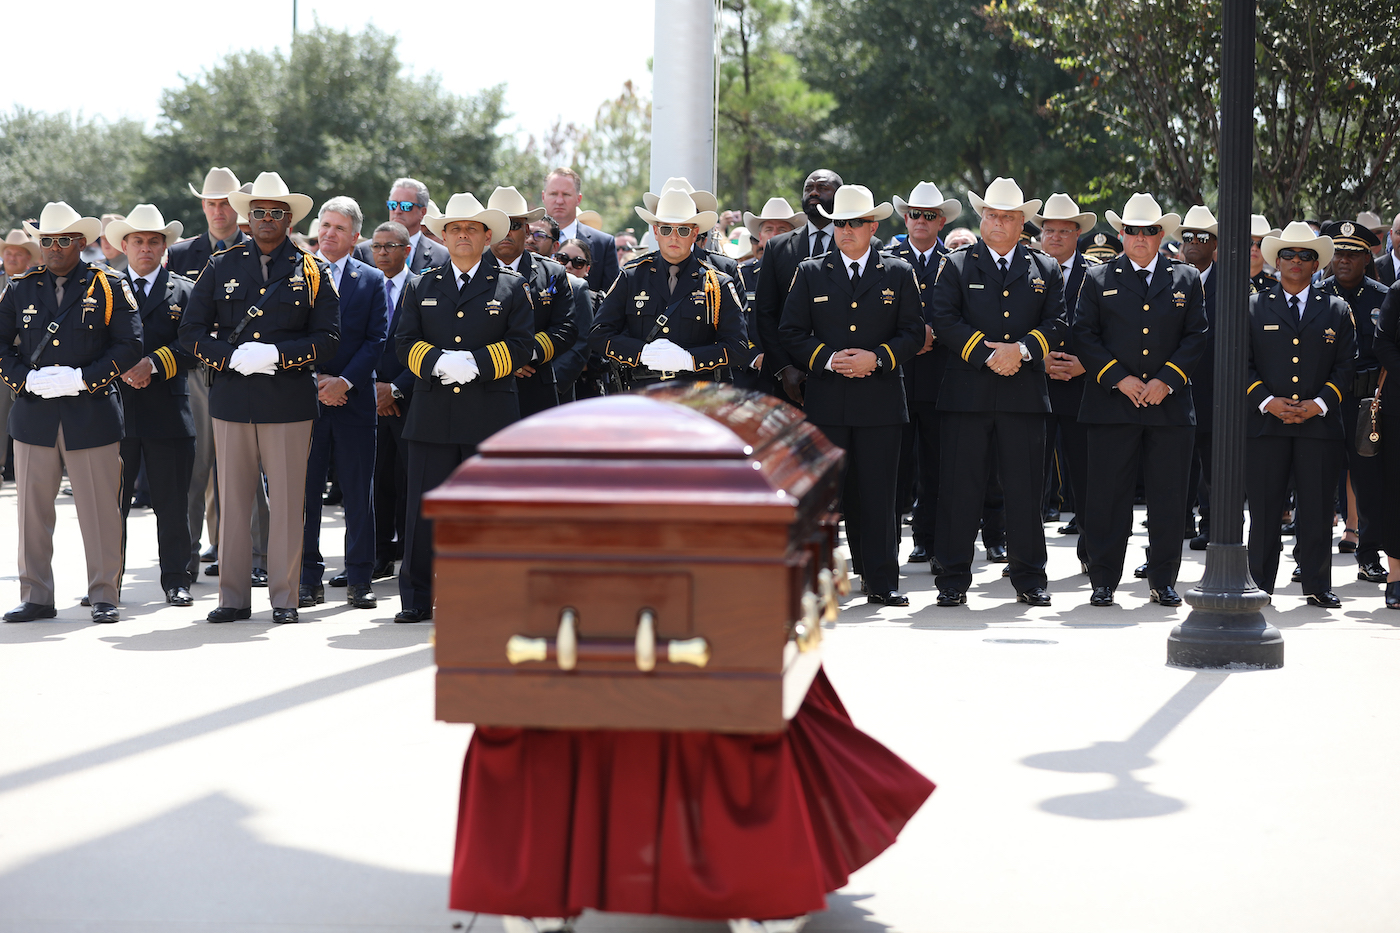 Thousands gathered for services for Deputy Sandeep Dhaliwal at the The Berry Center of Northwest Houston on October 2, 2019. Deputy Dhaliwal was fatally shot while conducting a traffic stop on Friday afternoon.  Photo by Sharon Steinmann/Harris County Sheriff’s Office